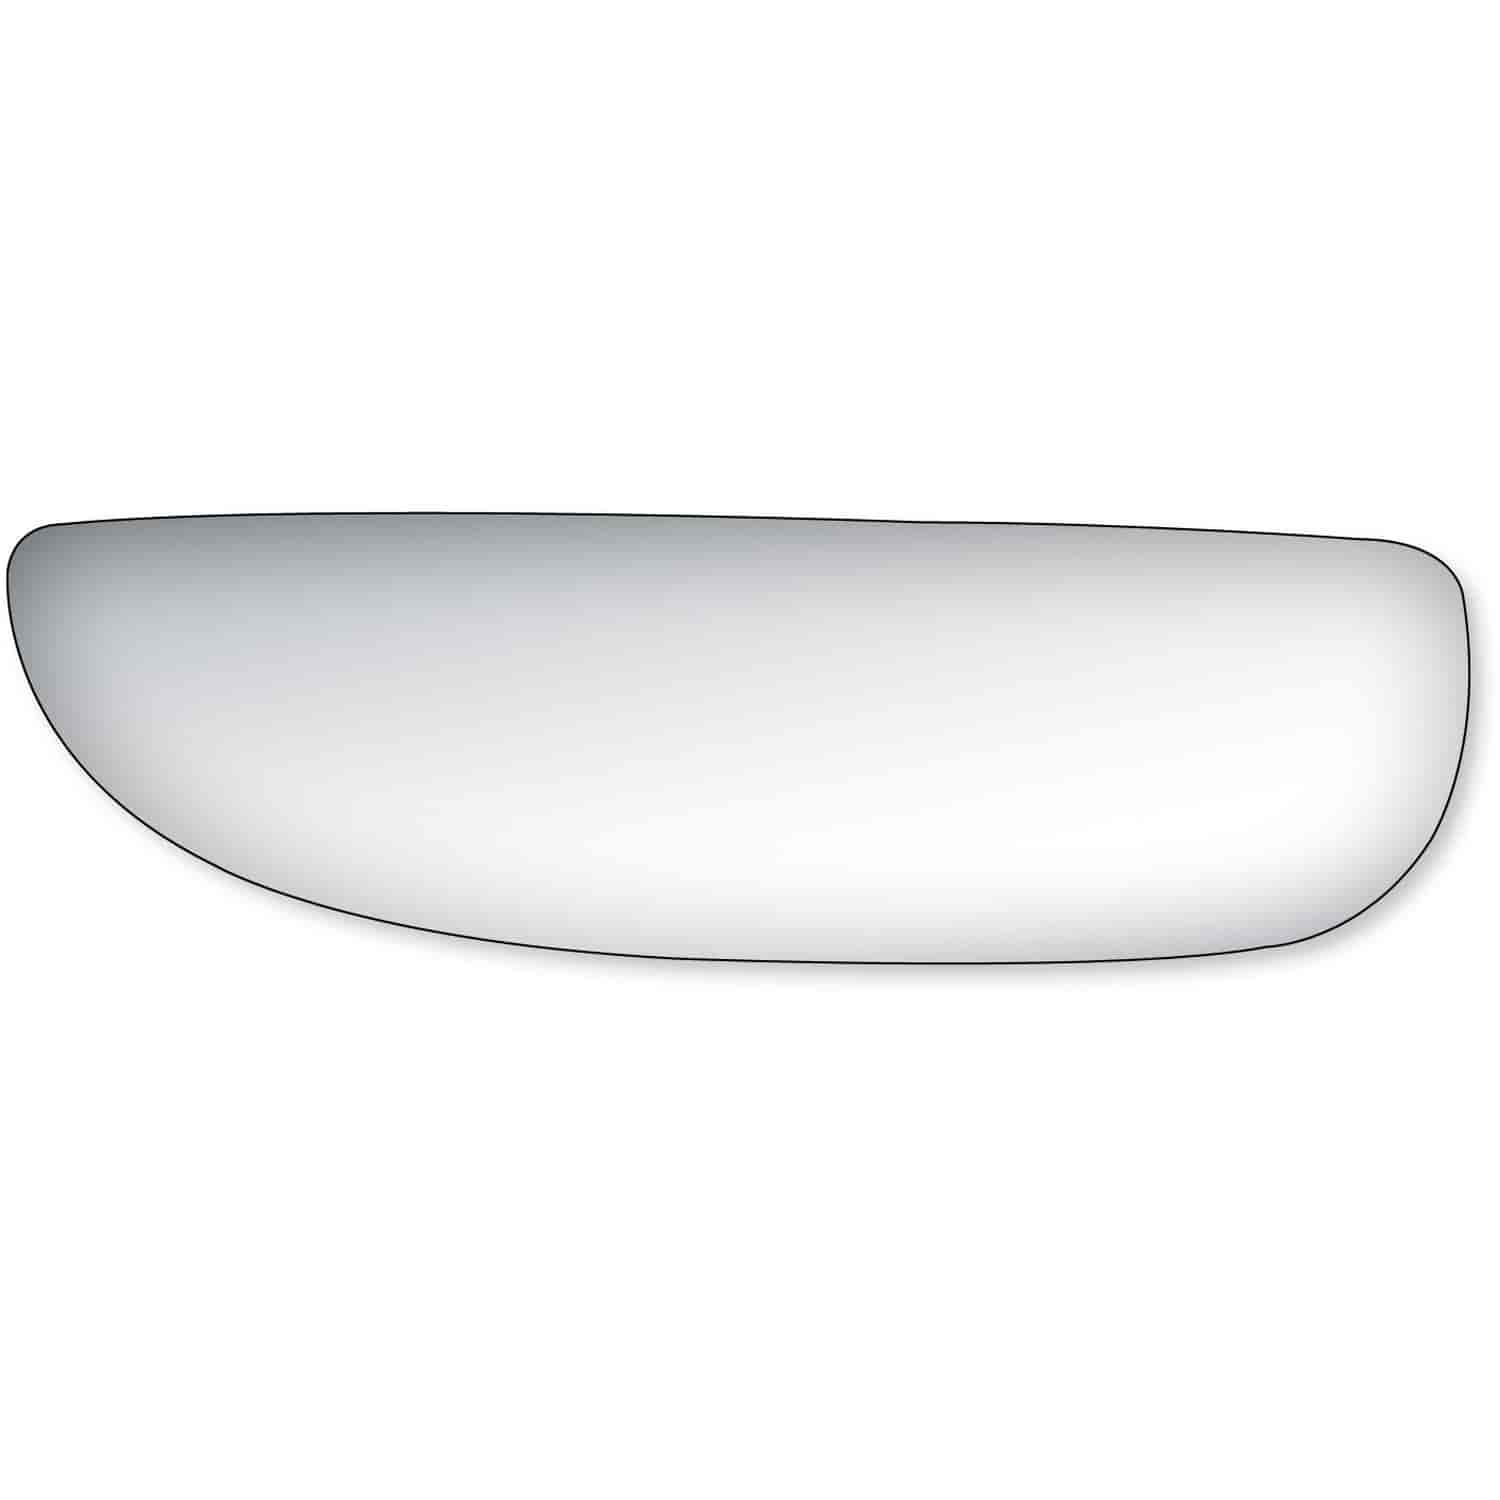 OE Replacement Mirror Glass Fits Ford Econoline, Excursion, and F-Series Super Duty